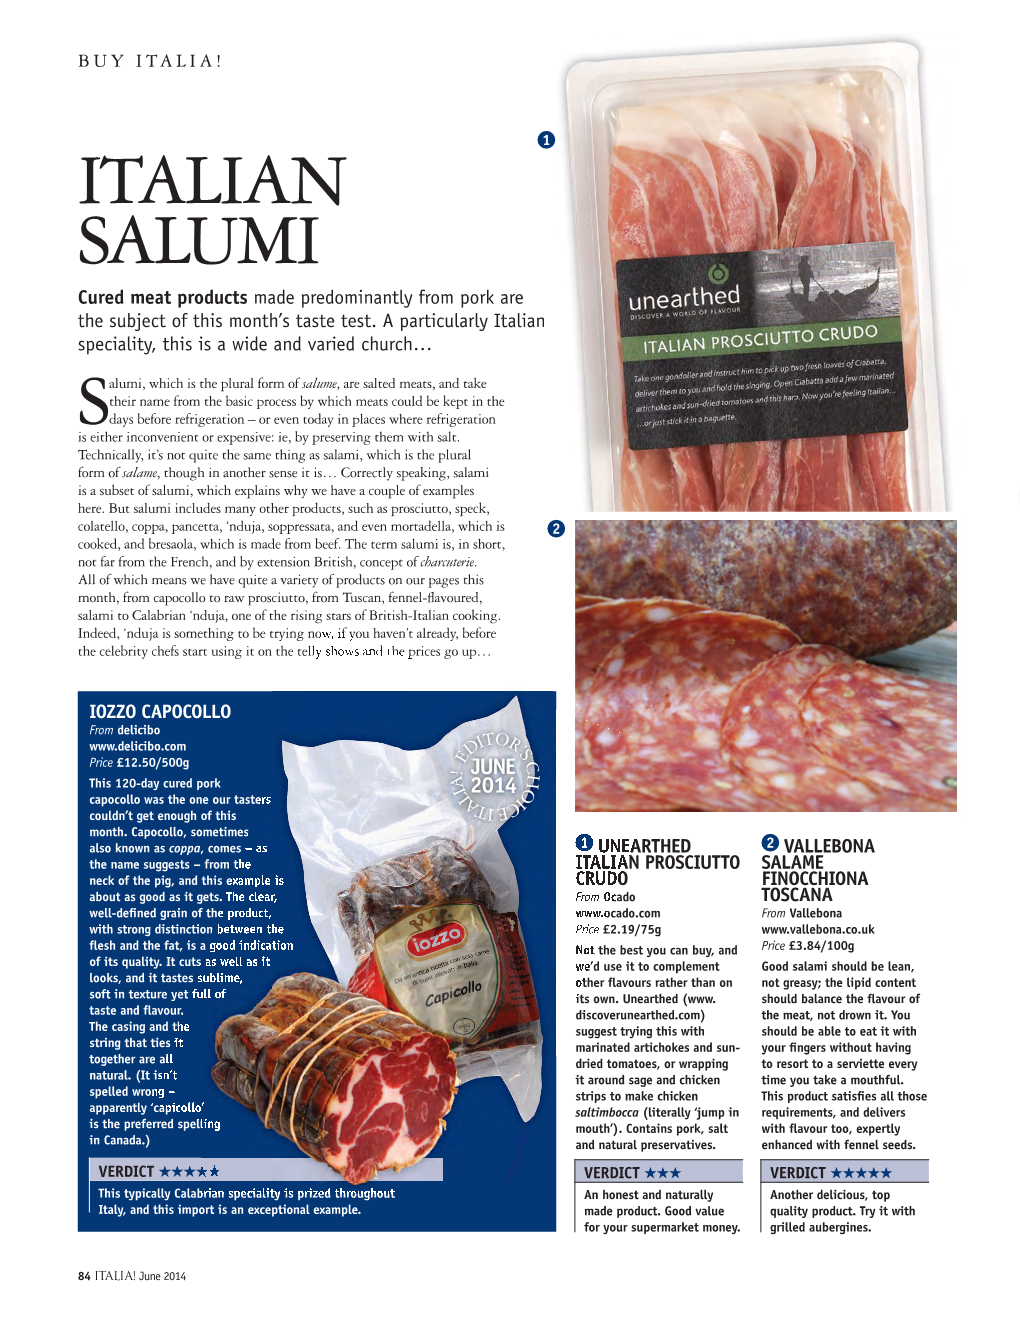 ITALIAN SALUMI Cured Meat Products Made Predominantly from Pork Are the Subject of This Month’S Taste Test